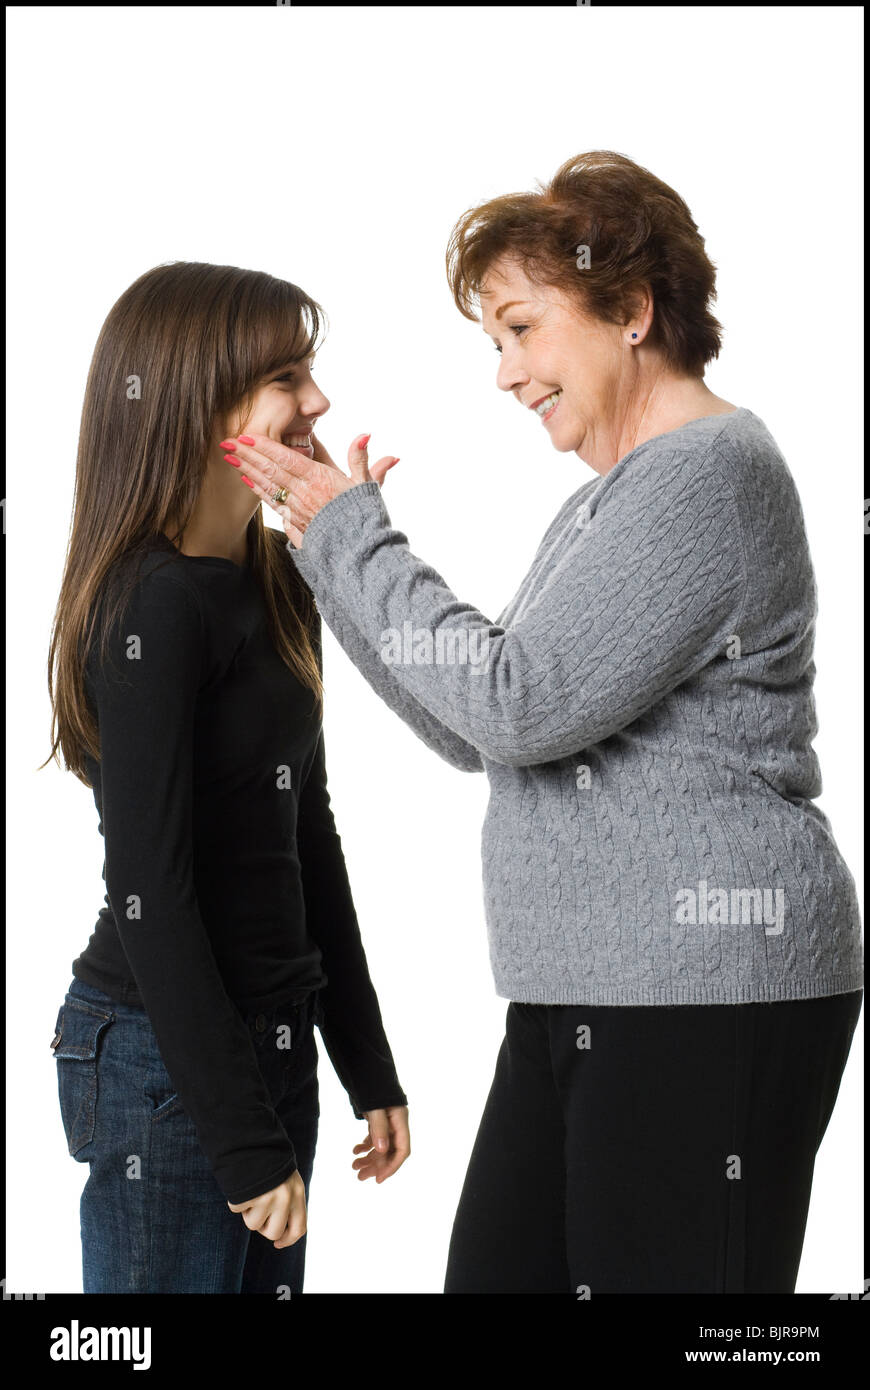 Grandmother and granddaughter Stock Photo